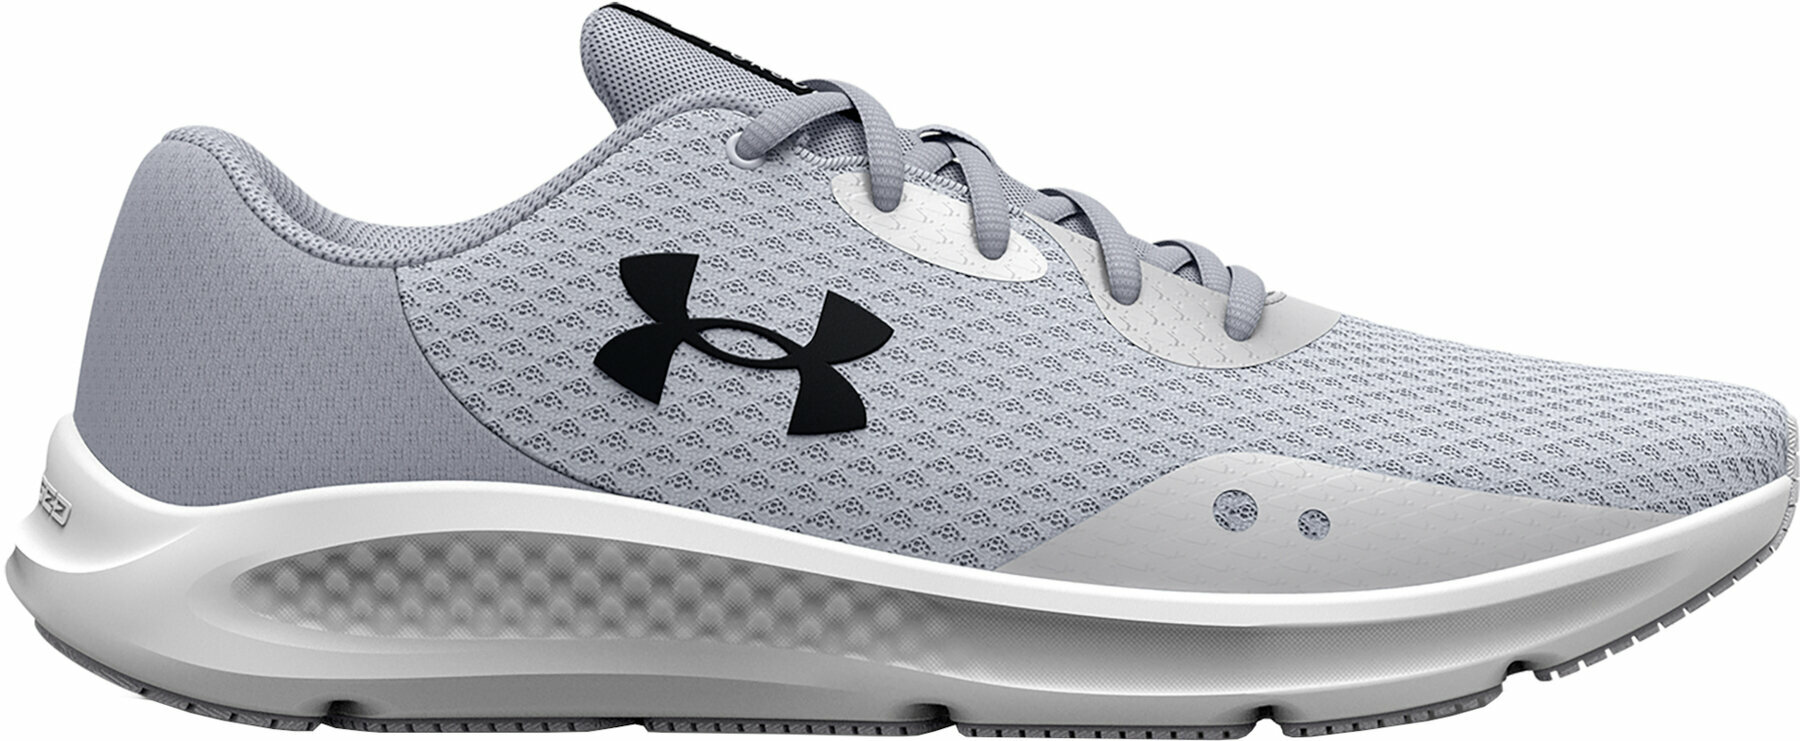 Road running shoes
 Under Armour Women's UA Charged Pursuit 3 Running Shoes Halo Gray/Mod Gray 37,5 Road running shoes